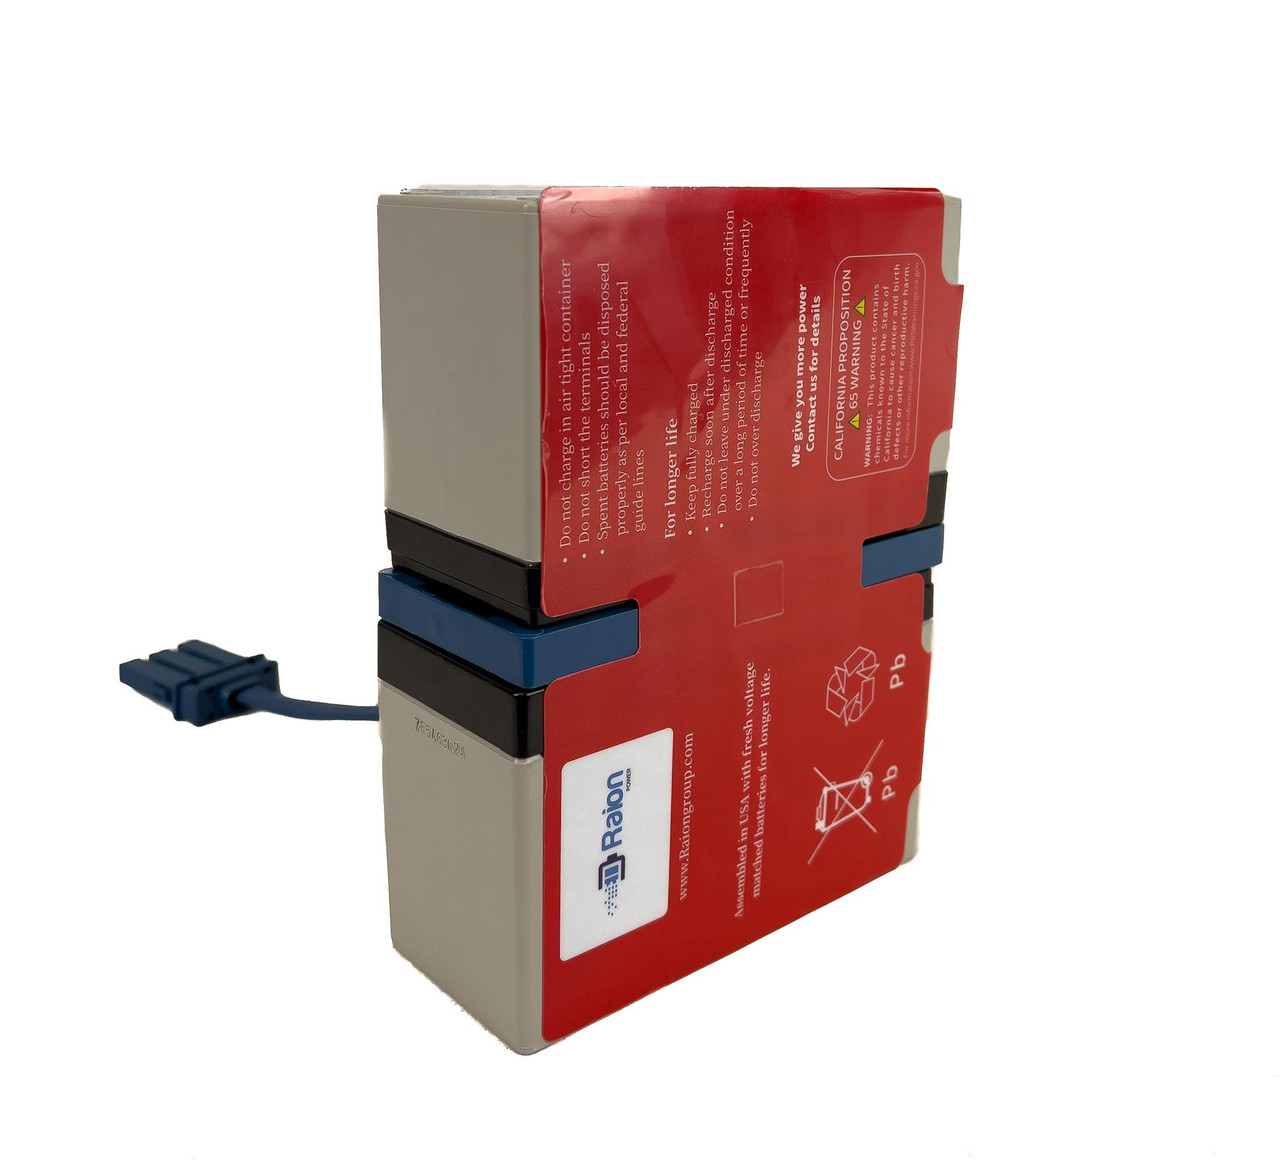 Raion Power RG-RBC32 Replacement High Rate Battery Cartridge for APC Back-UPS RS 1000VA BX1000-PCN